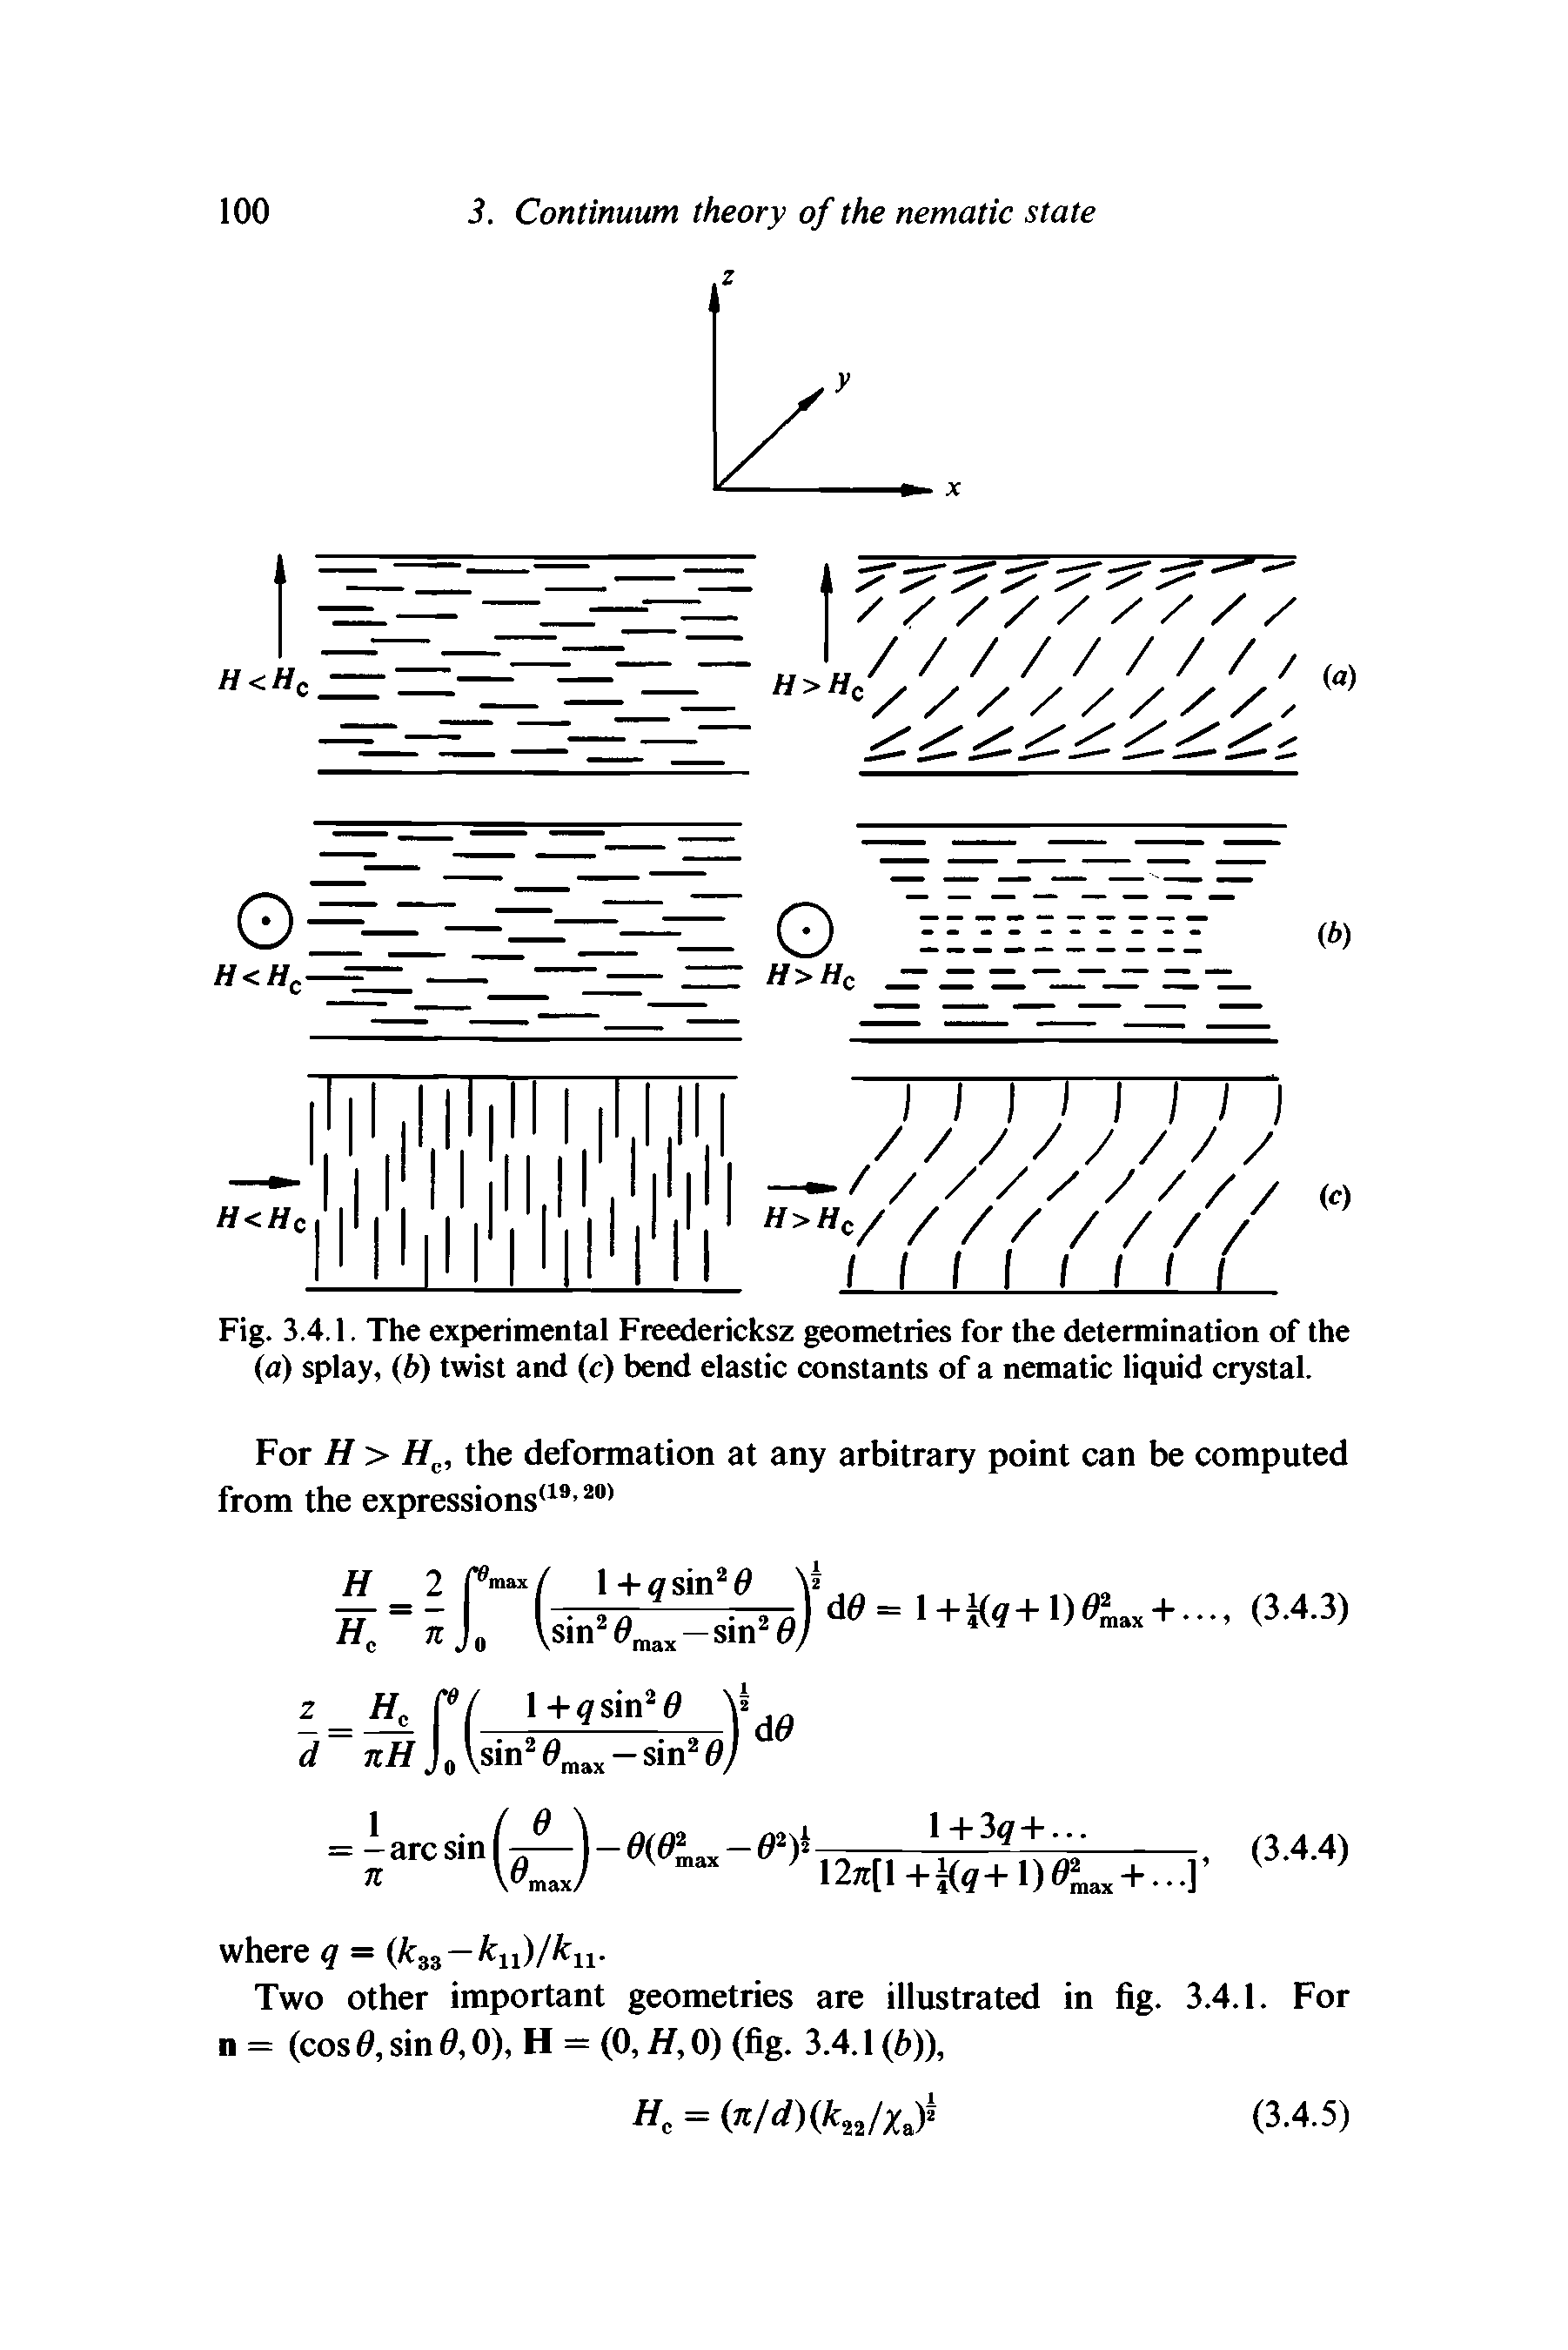 Fig. 3.4.1. The experimental Fteedericksz geometries for the determination of the (a) splay, (b) twist and (c) bend elastic constants of a nematic liquid crystal.